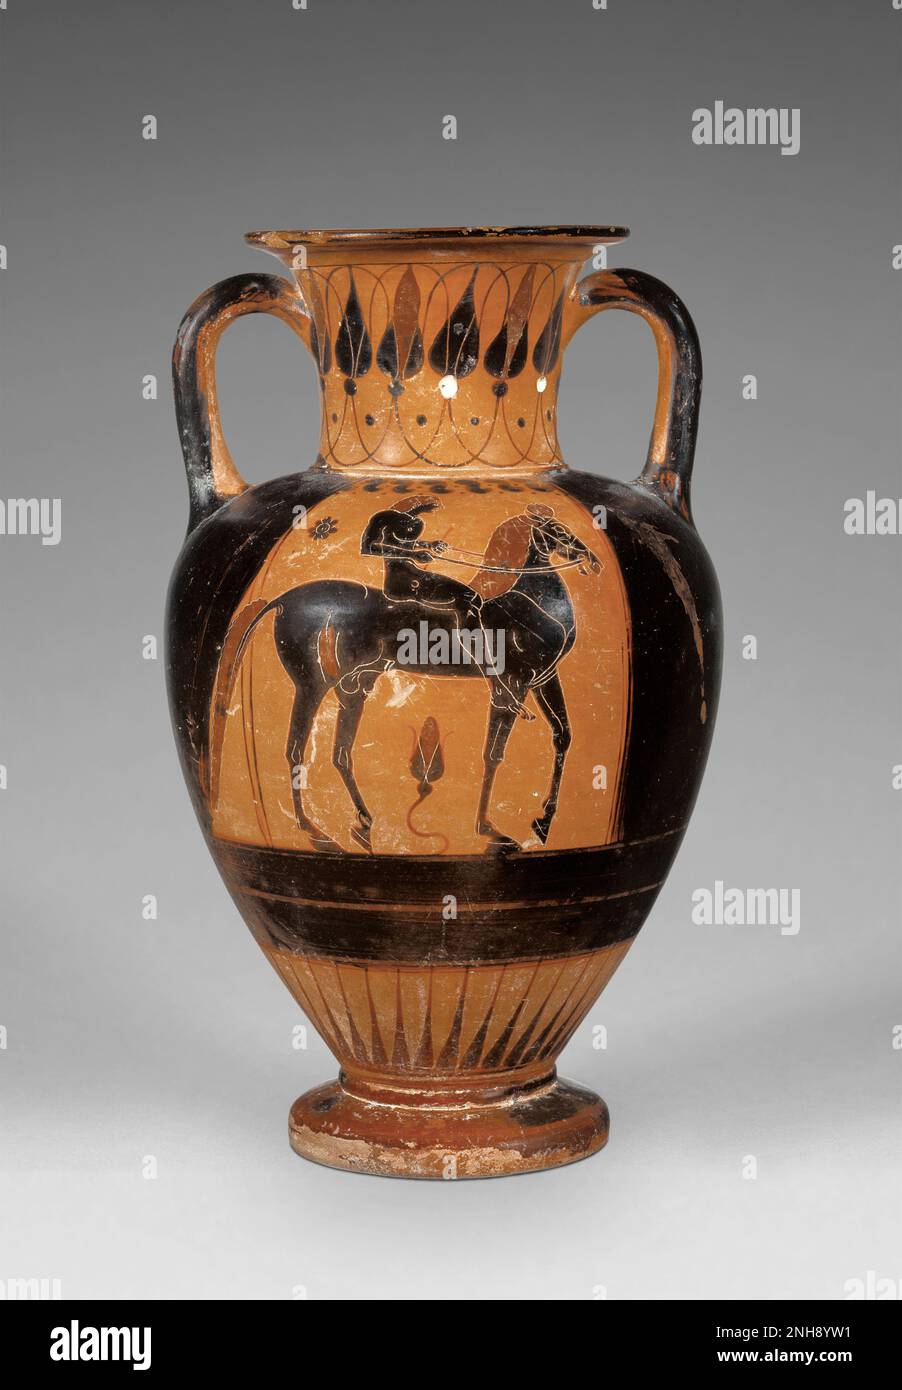 Chalcidian Neck Amphora; Attributed to Phineus Painter (Greek (Chalcidian), active about 530 - 510 B.C.); Rhegion, South Italy; about 520-510 B.C. Stock Photo